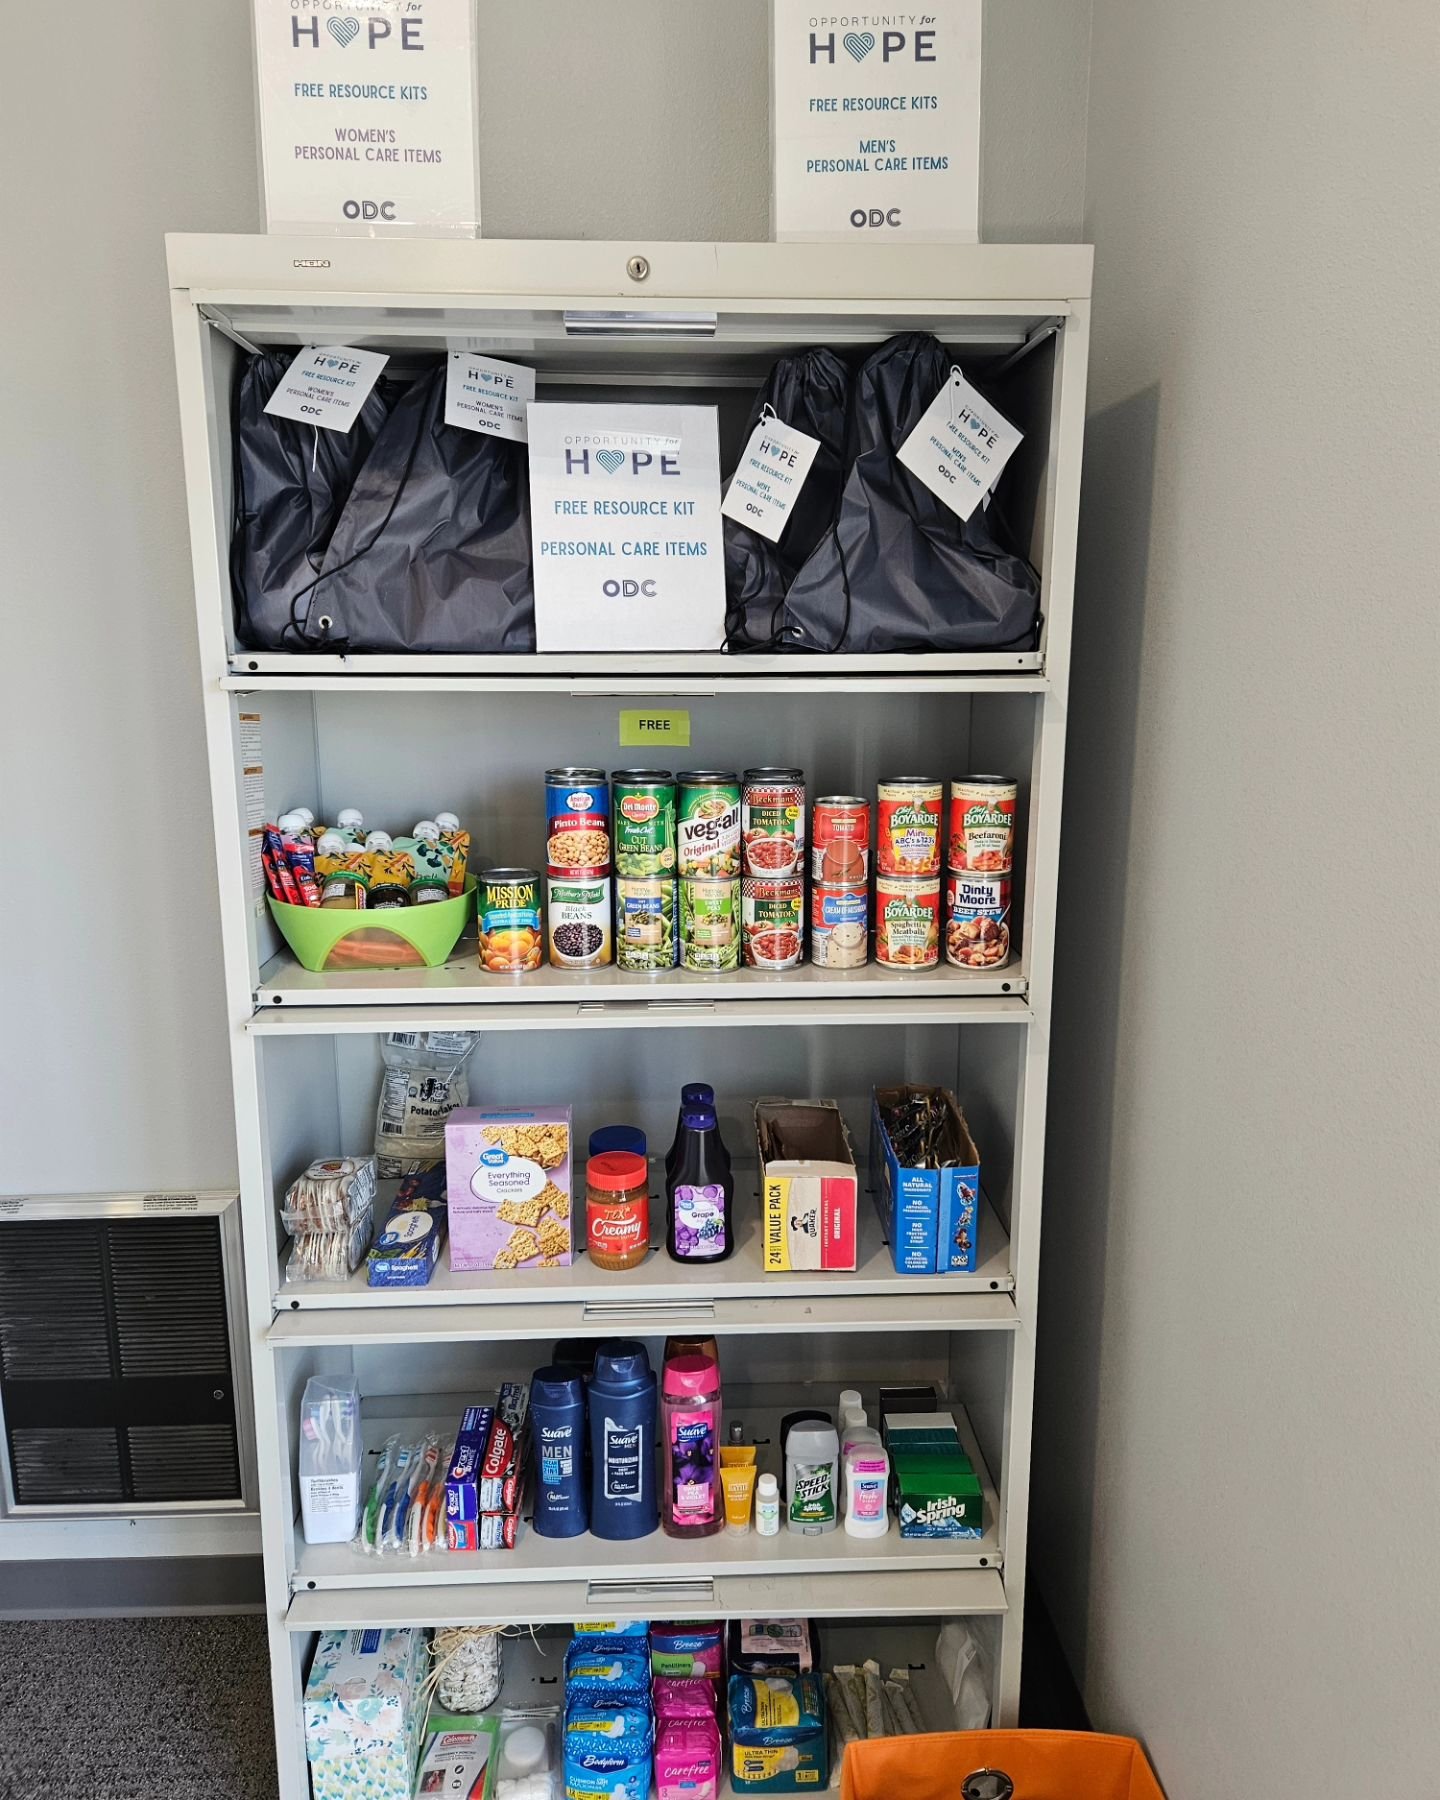 THANK YOU SO MUCH TO EVERYONE WHO DONATED ITEMS TO HELP US STOCK OUR SHELVES! Your donation helps us continue to provide FREE resources to ANYONE who needs them. Resources are available at Opportunity for Hope Mental Health Clinic located at 1191 Hun